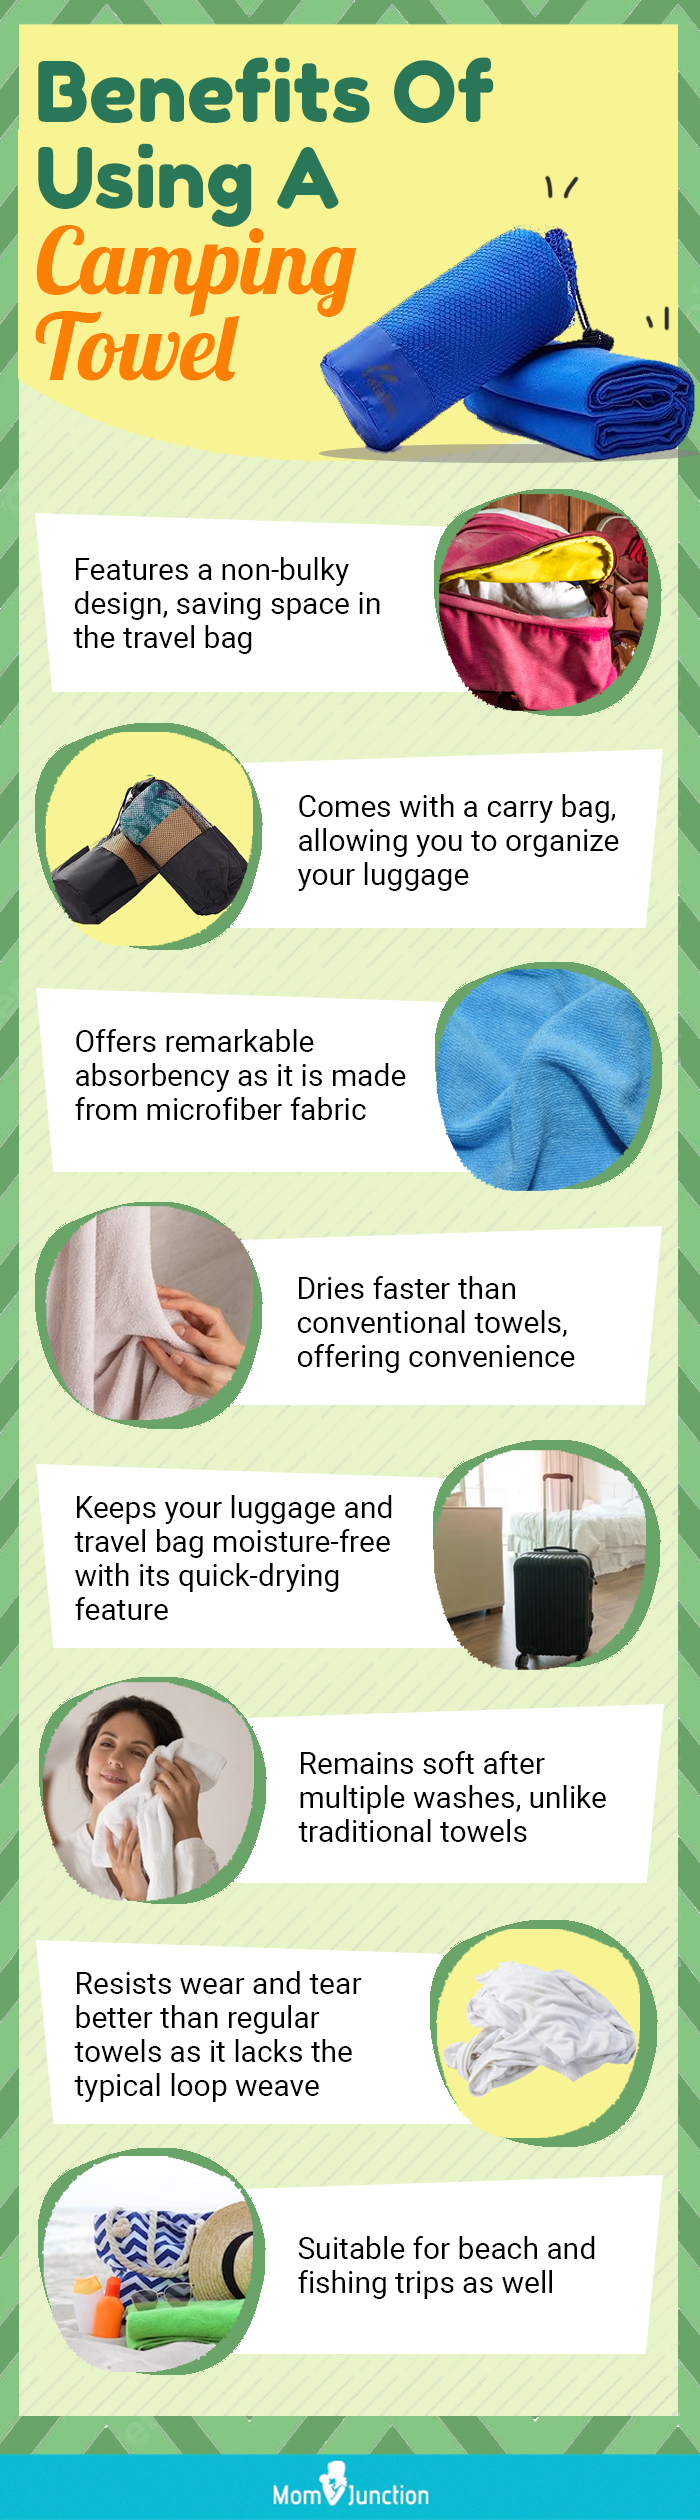 Benefits Of Using A Camping Towel (infographic)